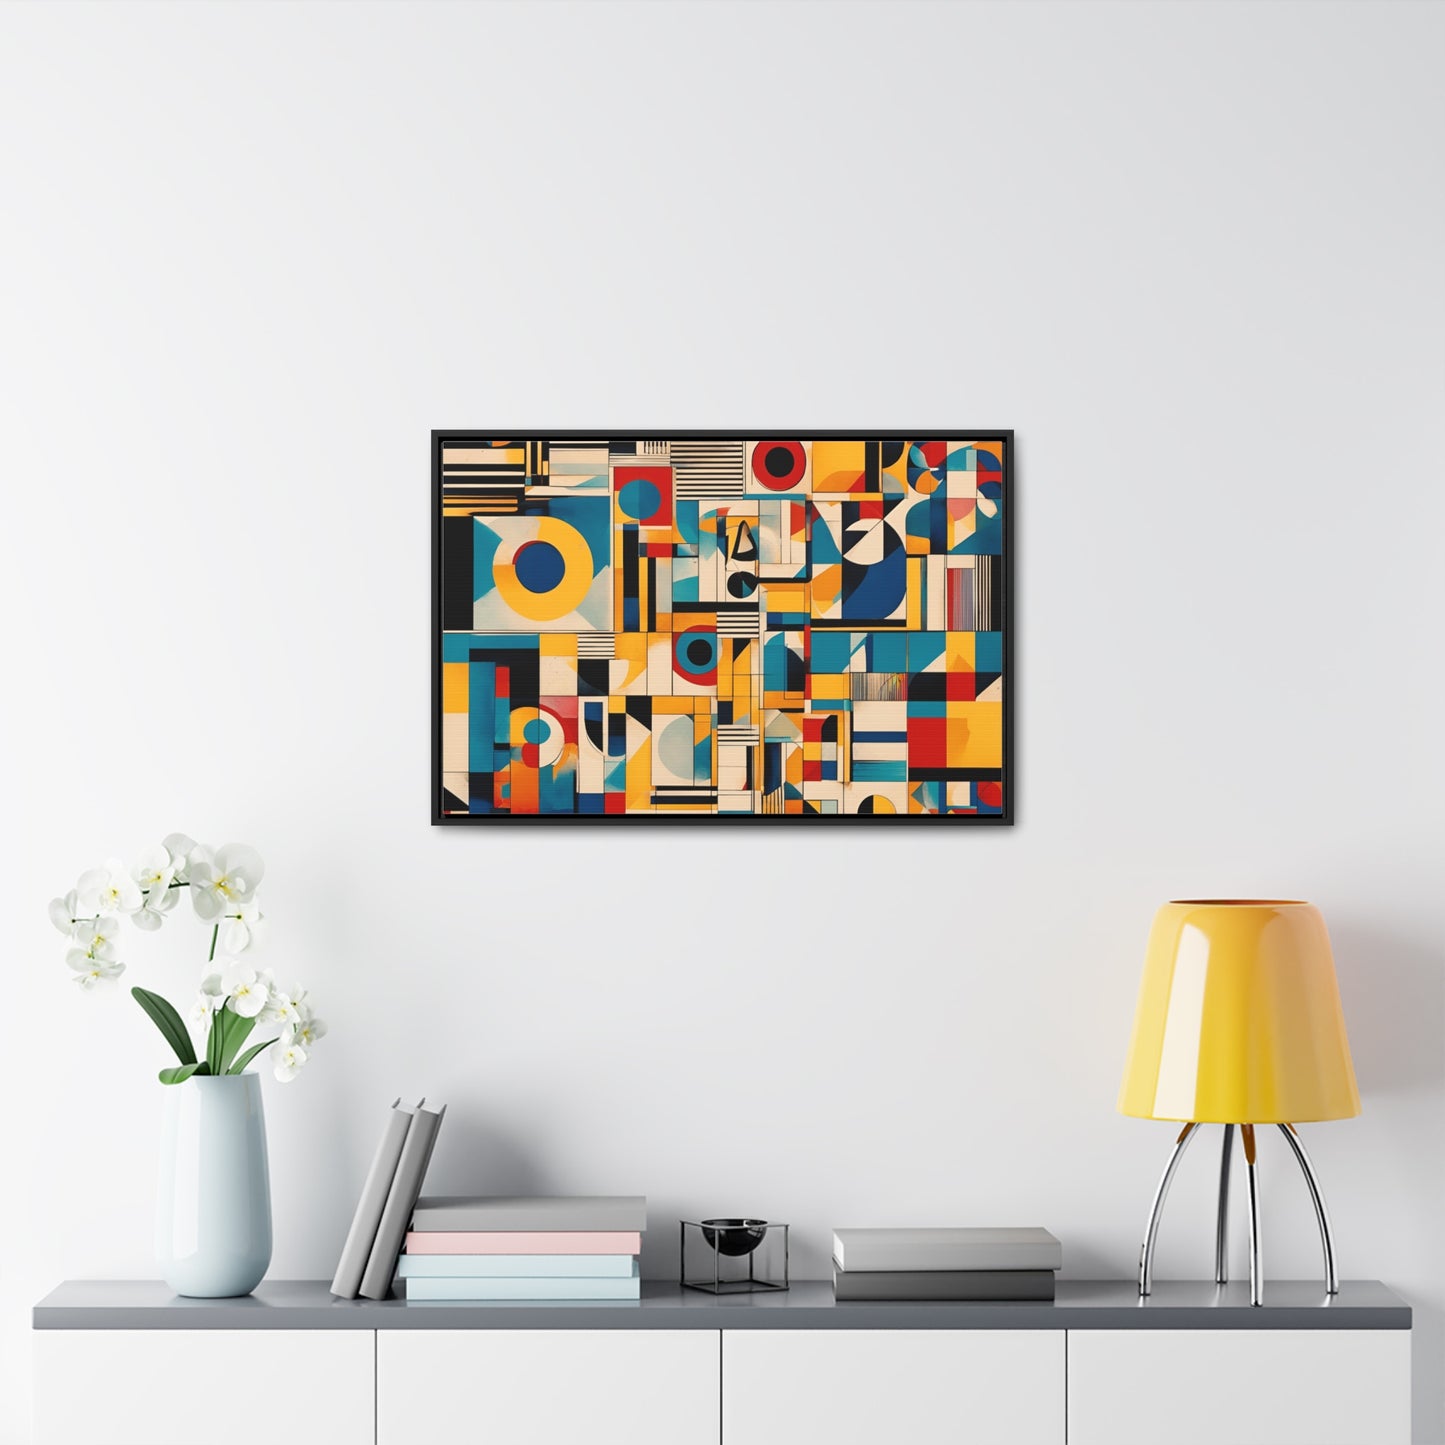 Bold Mid Century Modern Wall Art Print on Canvas in a Floating Frame 36x24 hung